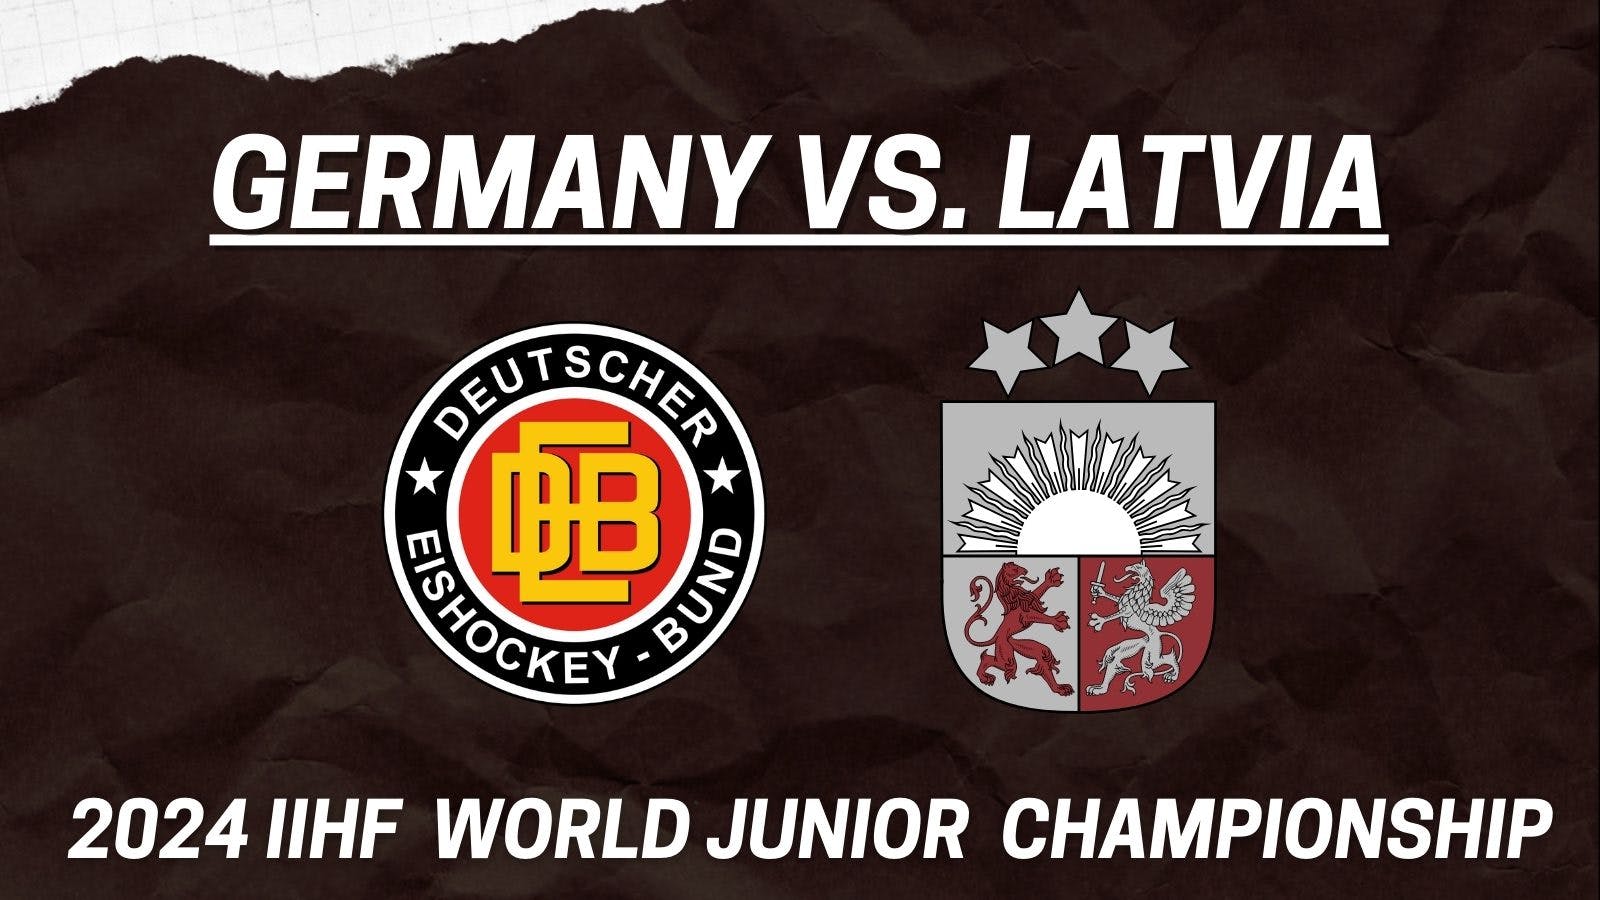 Top standouts from Germany vs. Latvia at 2024 World Junior Championship